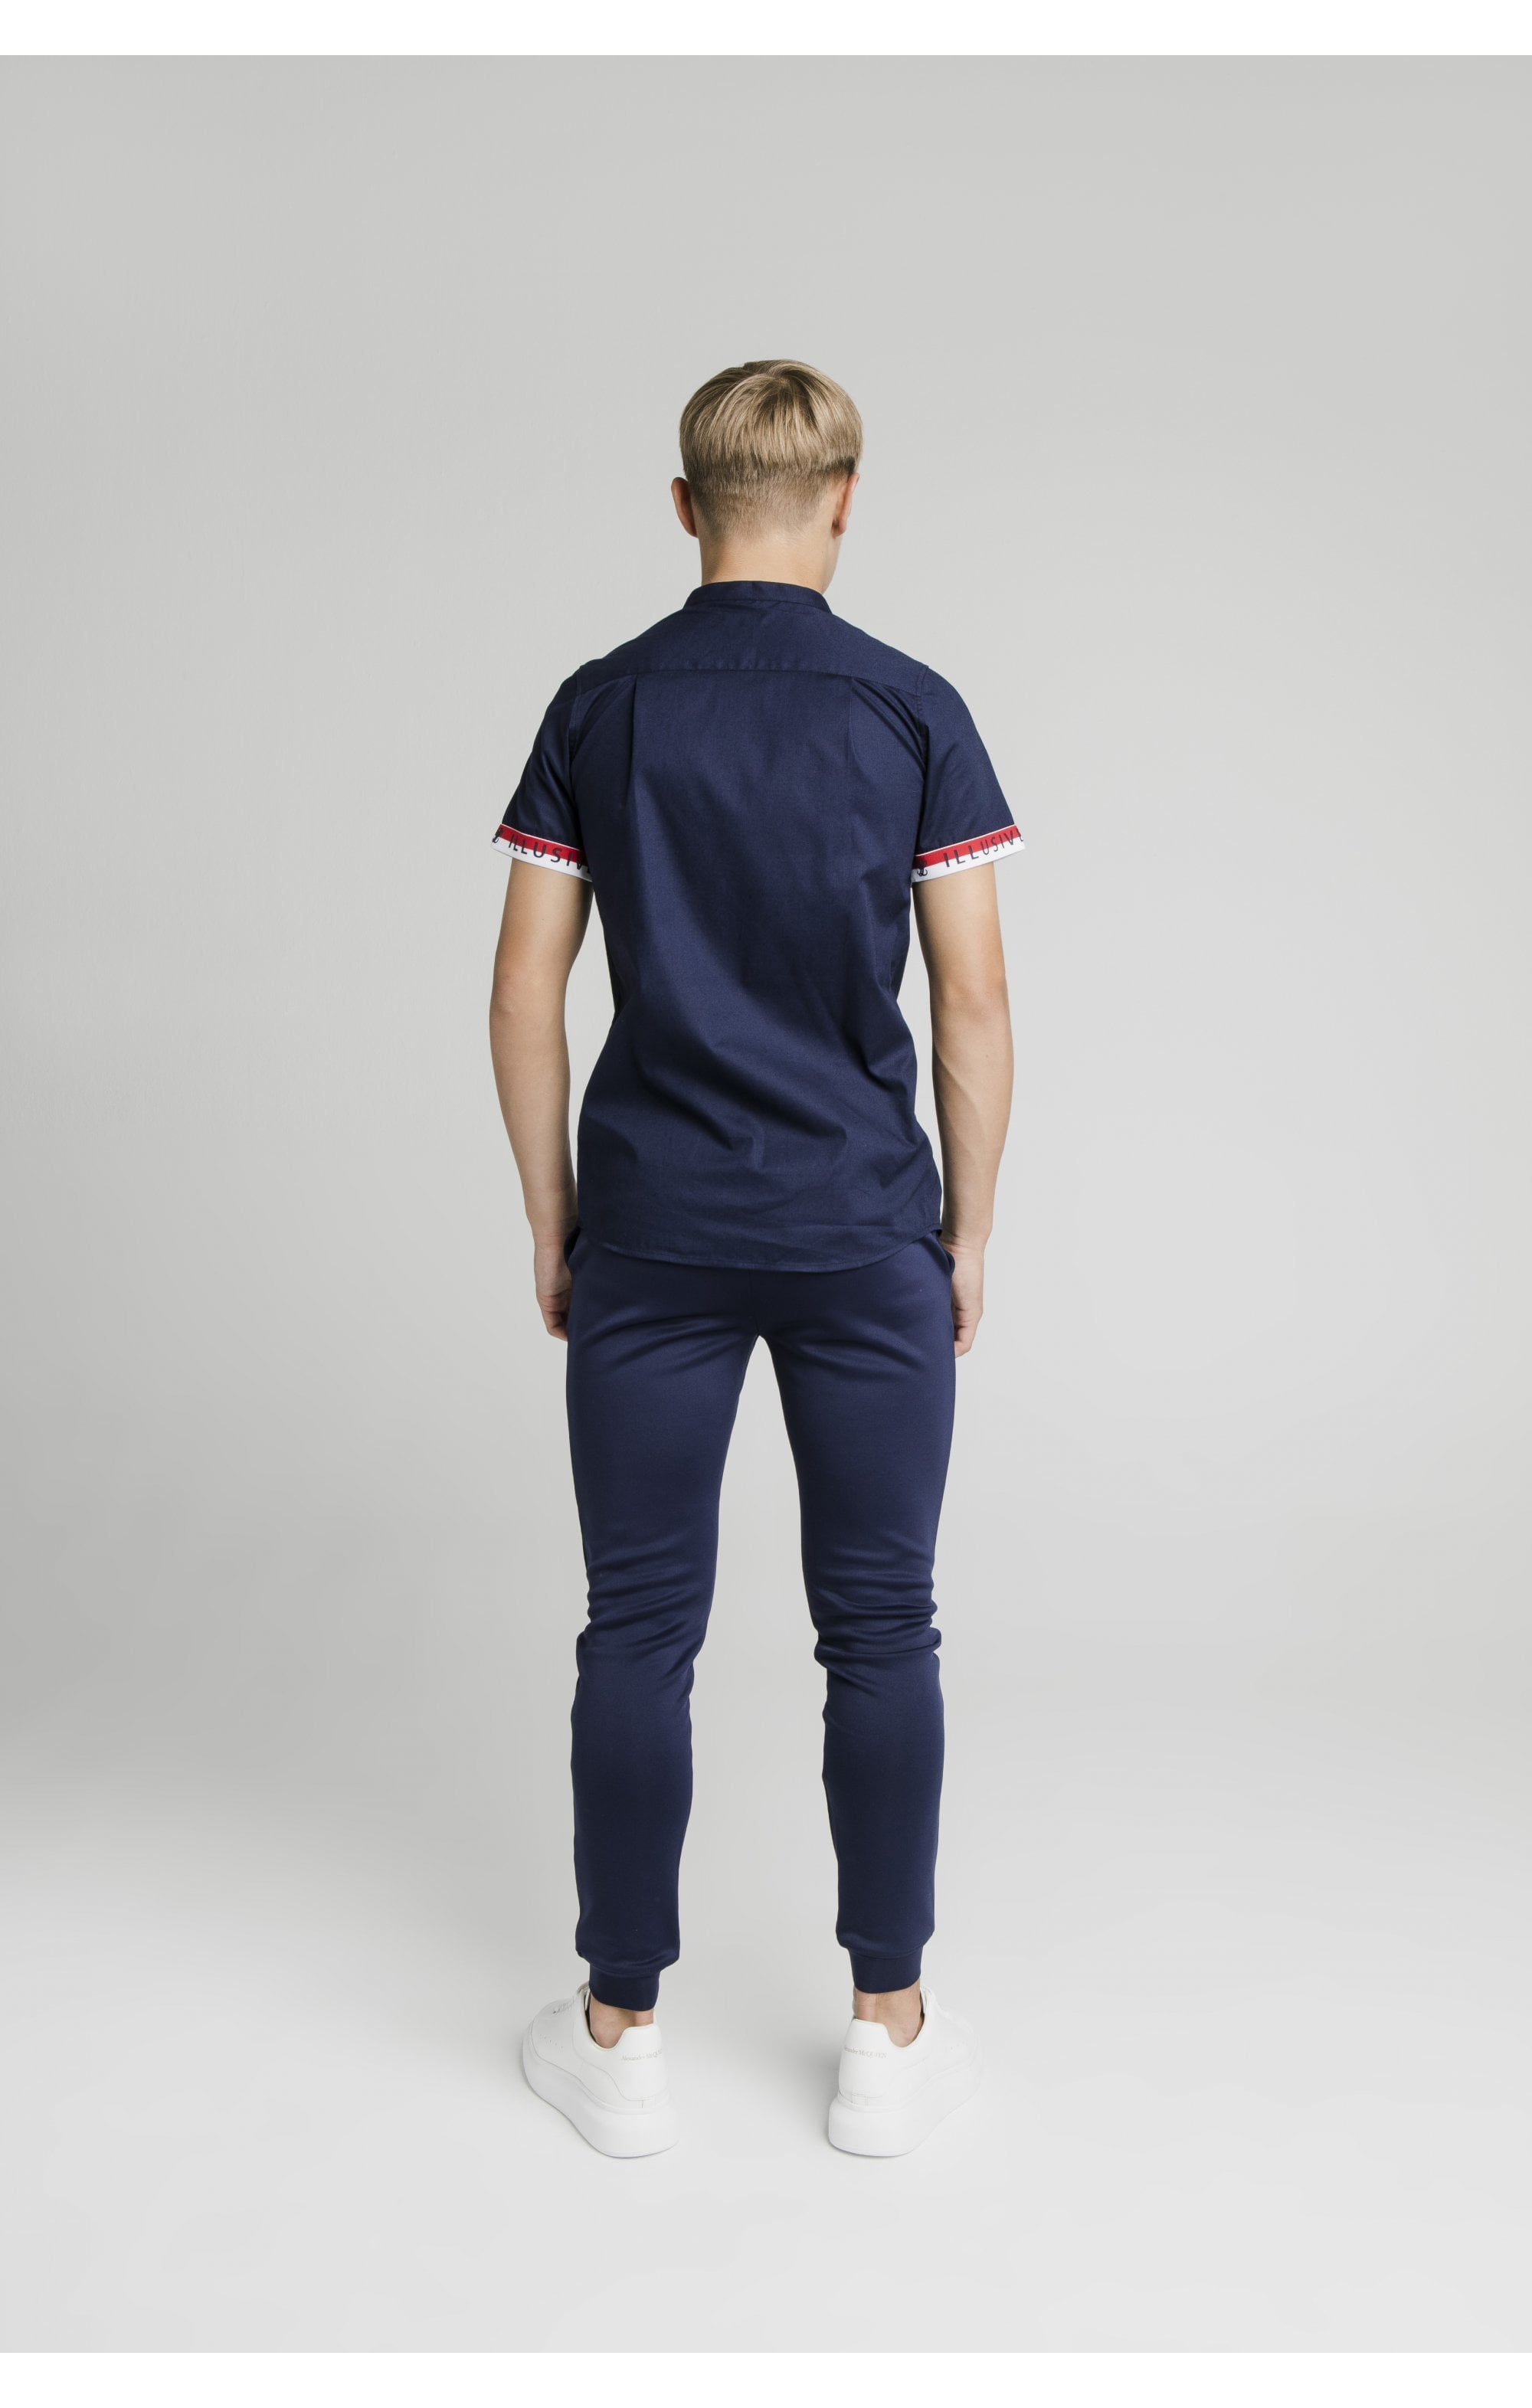 Load image into Gallery viewer, Illusive London S/S Tech Shirt - Navy (4)